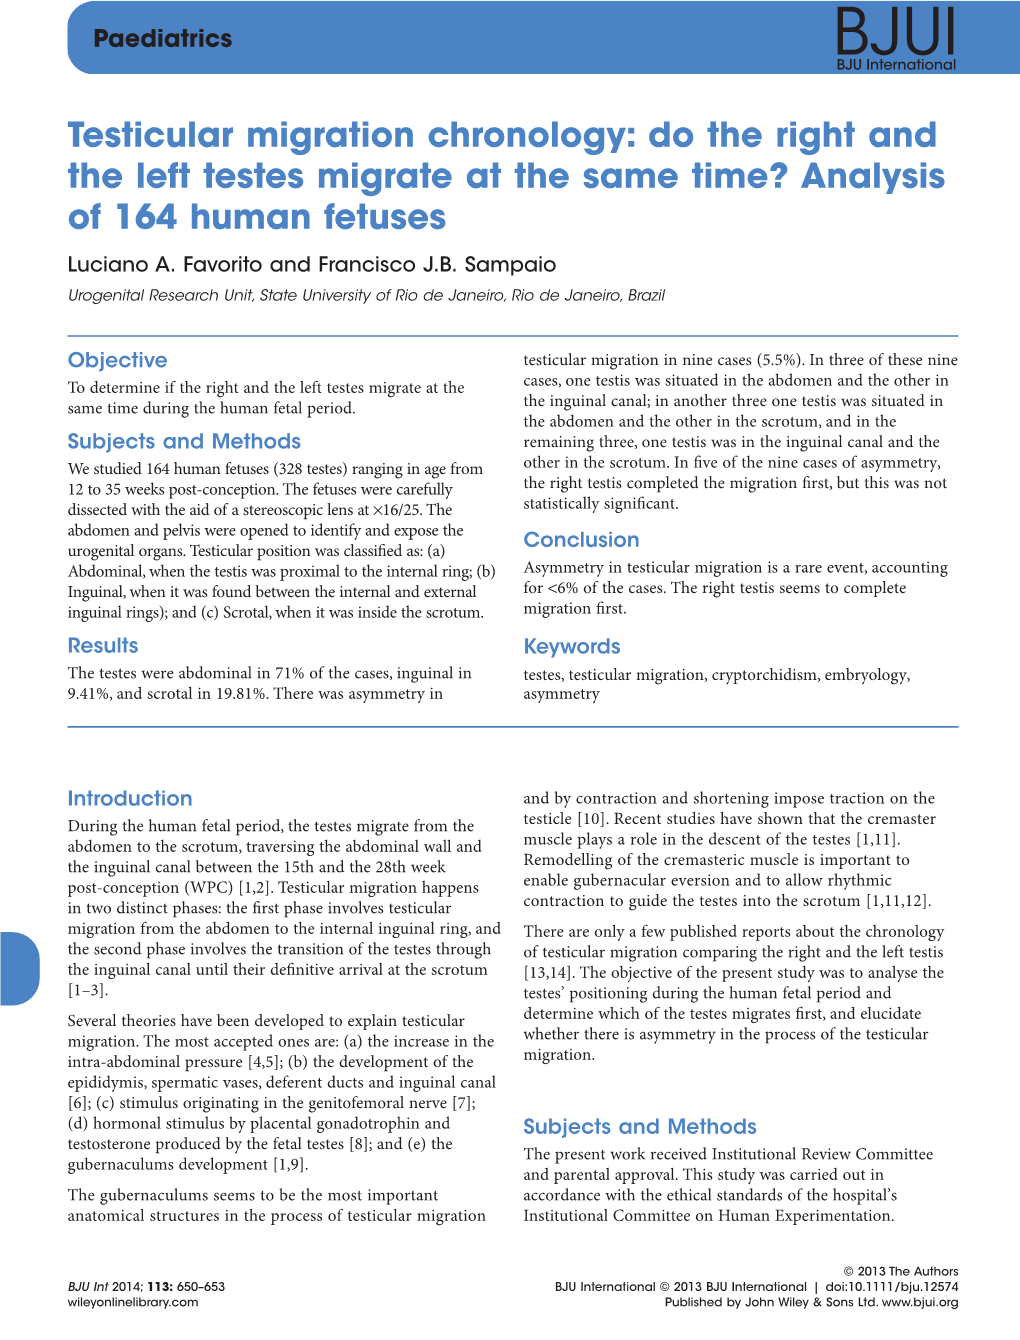 Testicular Migration Chronology: Do the Right and the Left Testes Migrate at the Same Time? Analysis of 164 Human Fetuses Luciano A